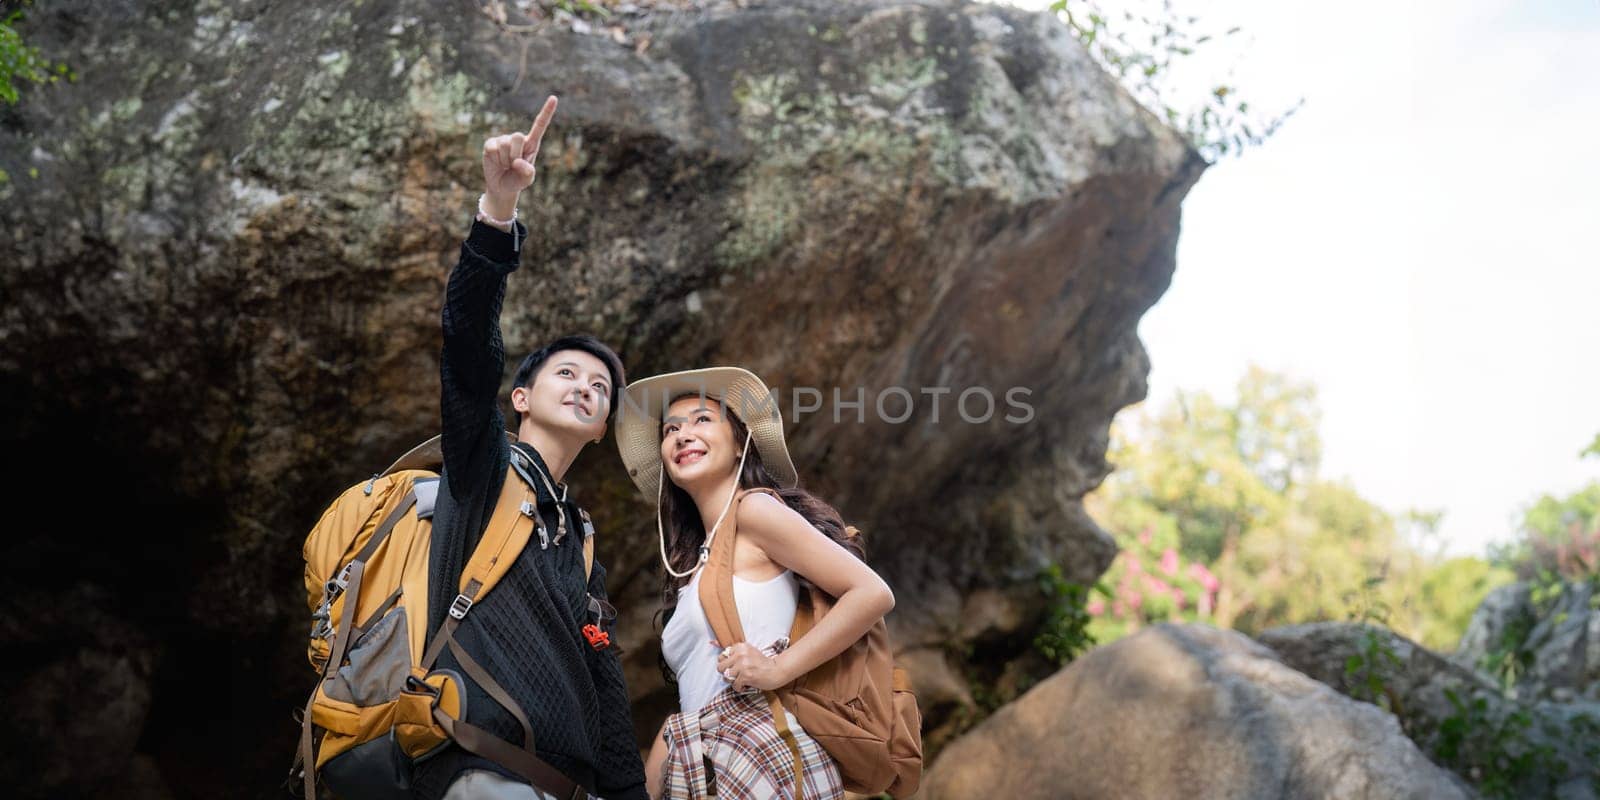 Lovely couple lesbian woman with backpack hiking in nature. Loving LGBT romantic moment in mountains.